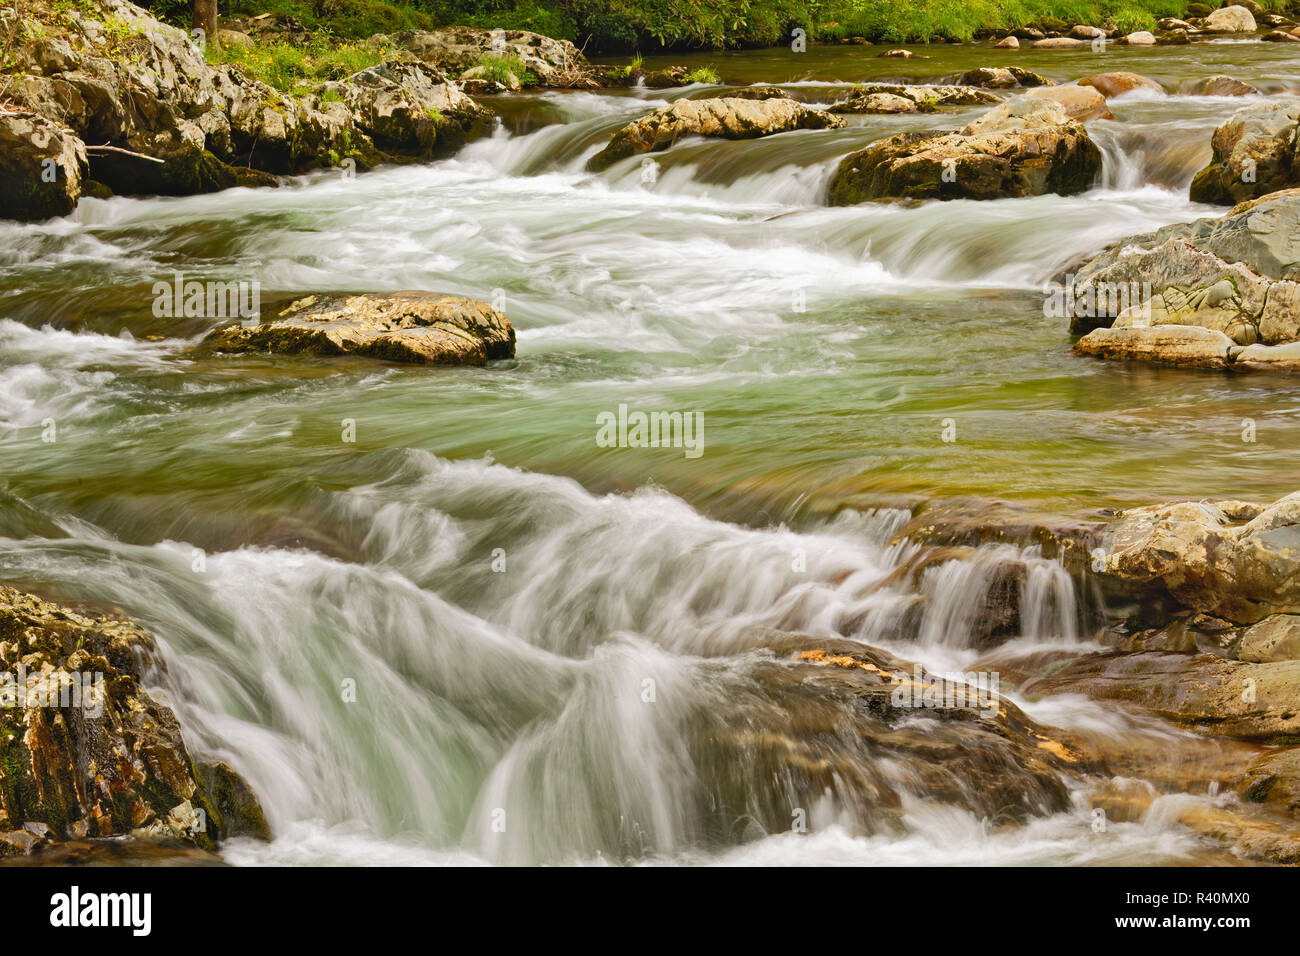 Little Pigeon River, Greenbrier, Great Smoky Mountains, National Park, Tennessee Stock Photo